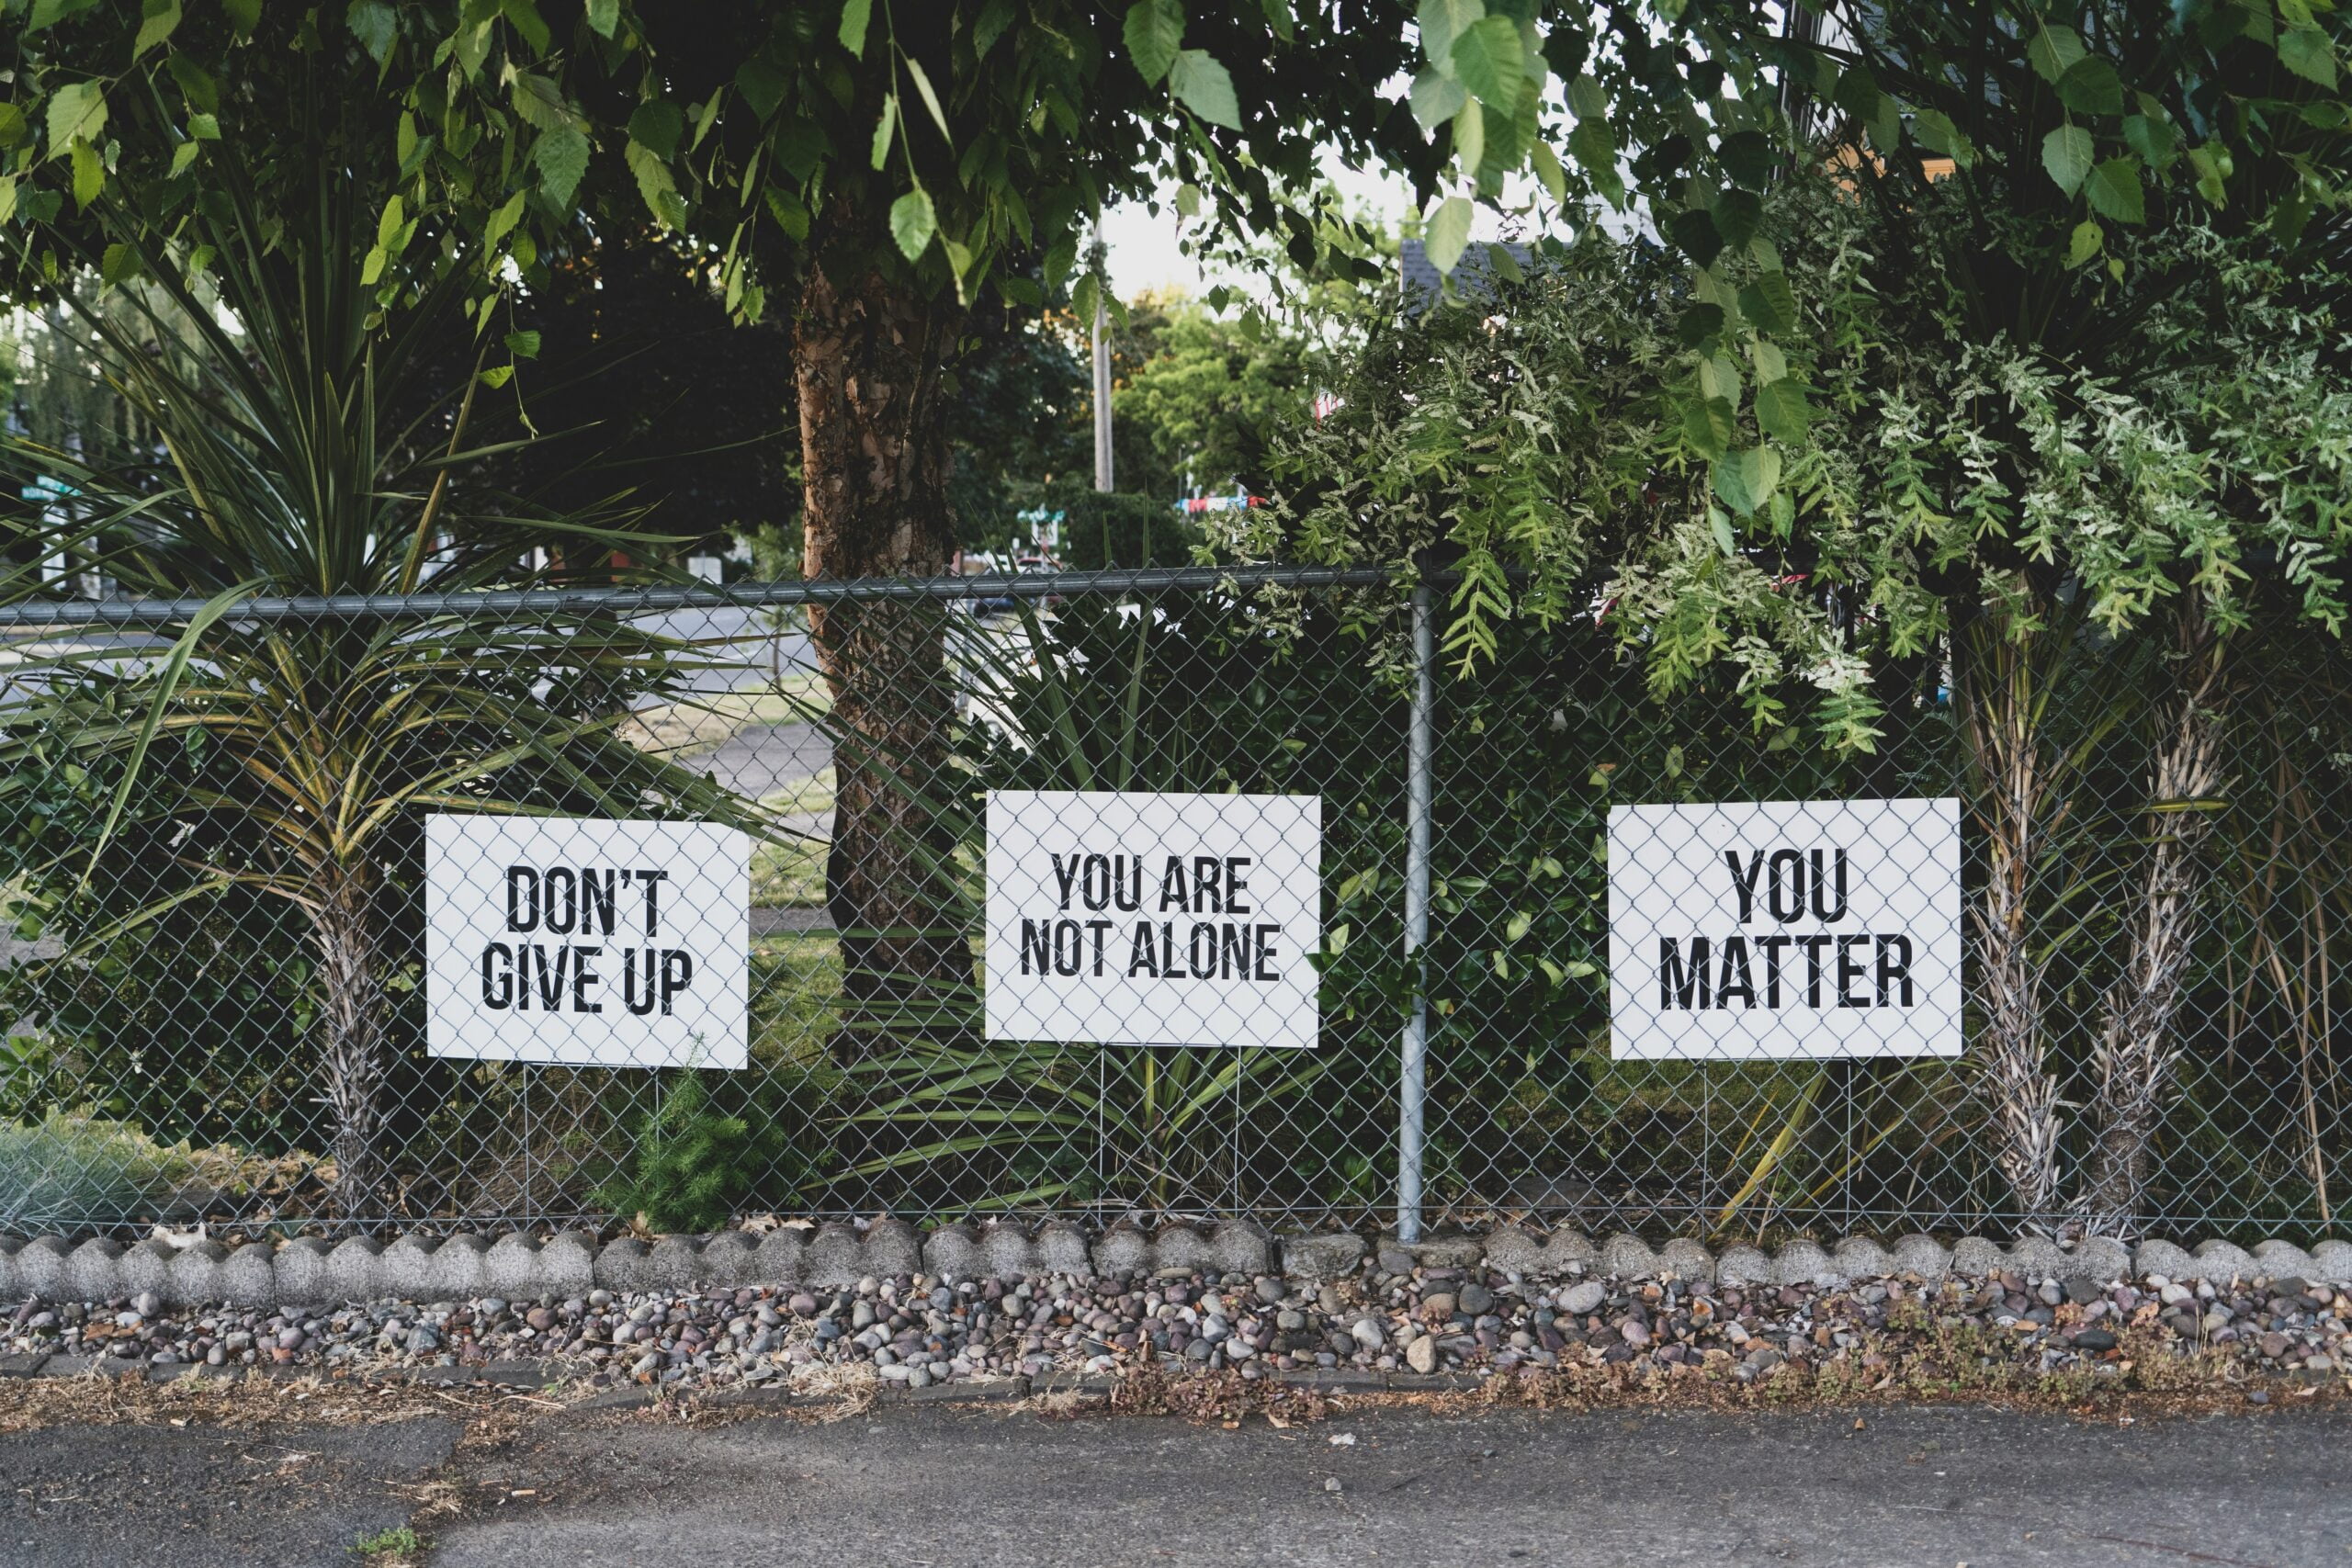 anxiety, don't give up. You are not alone, you matter signage on metal fence